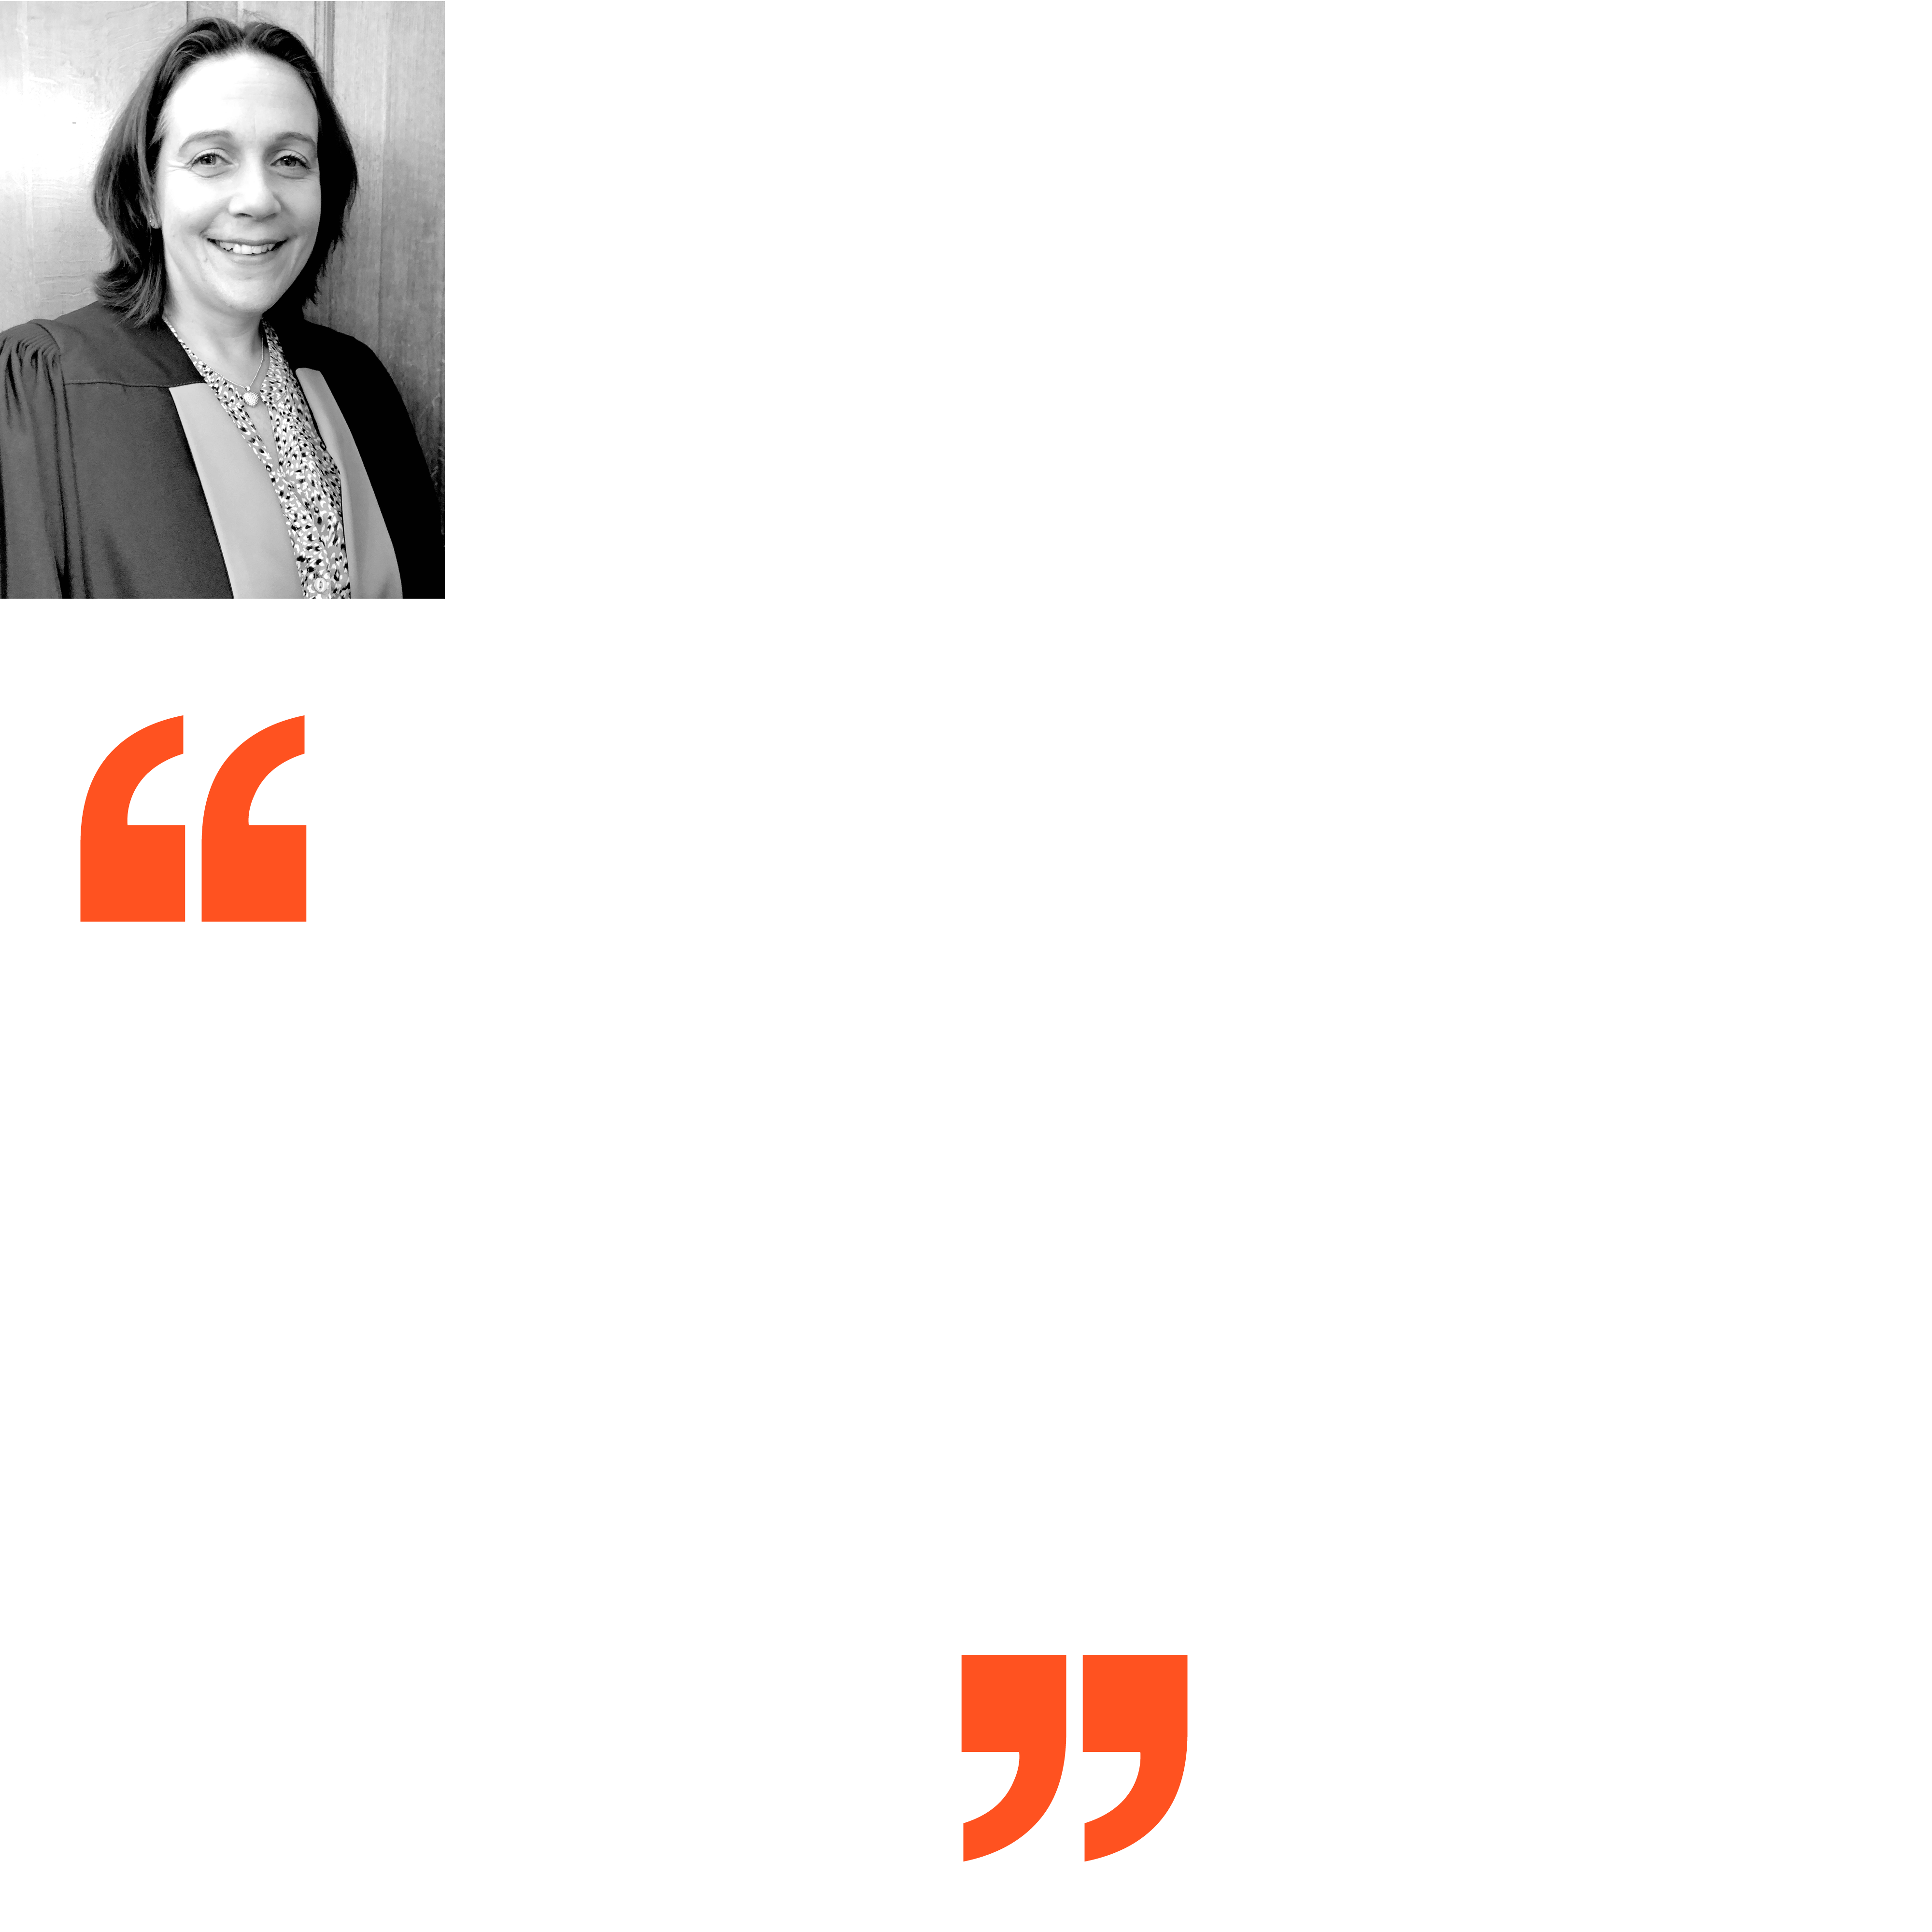 Quote from Emma Davies, Legal Officer, Royal College of Nursing. "I took the CILEX route into law as a flexible alternative to converting my non-law degree whilst working full time. Becoming actively involved with CILEX has presented so many opportunities I couldn't have imagined and I now find myself on the professional board actively advocating for a membership organisation I’m fiercely passionate about."